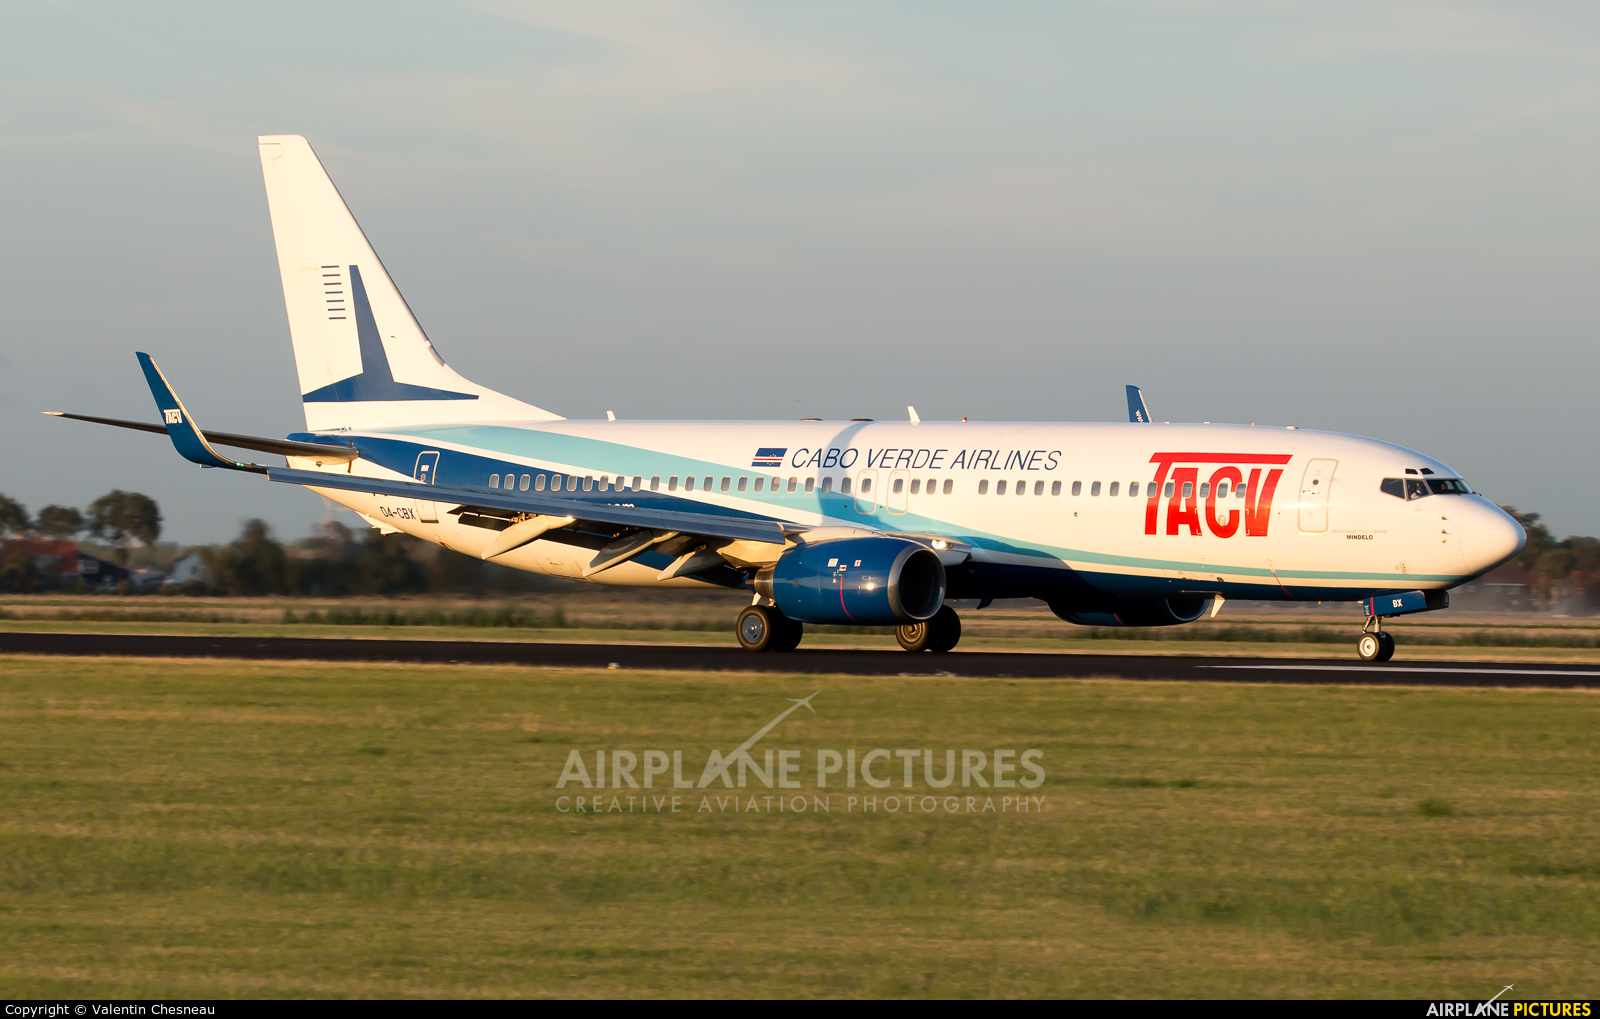 TACV-Cabo Verde Airlines D4-CBX aircraft at Amsterdam - Schiphol